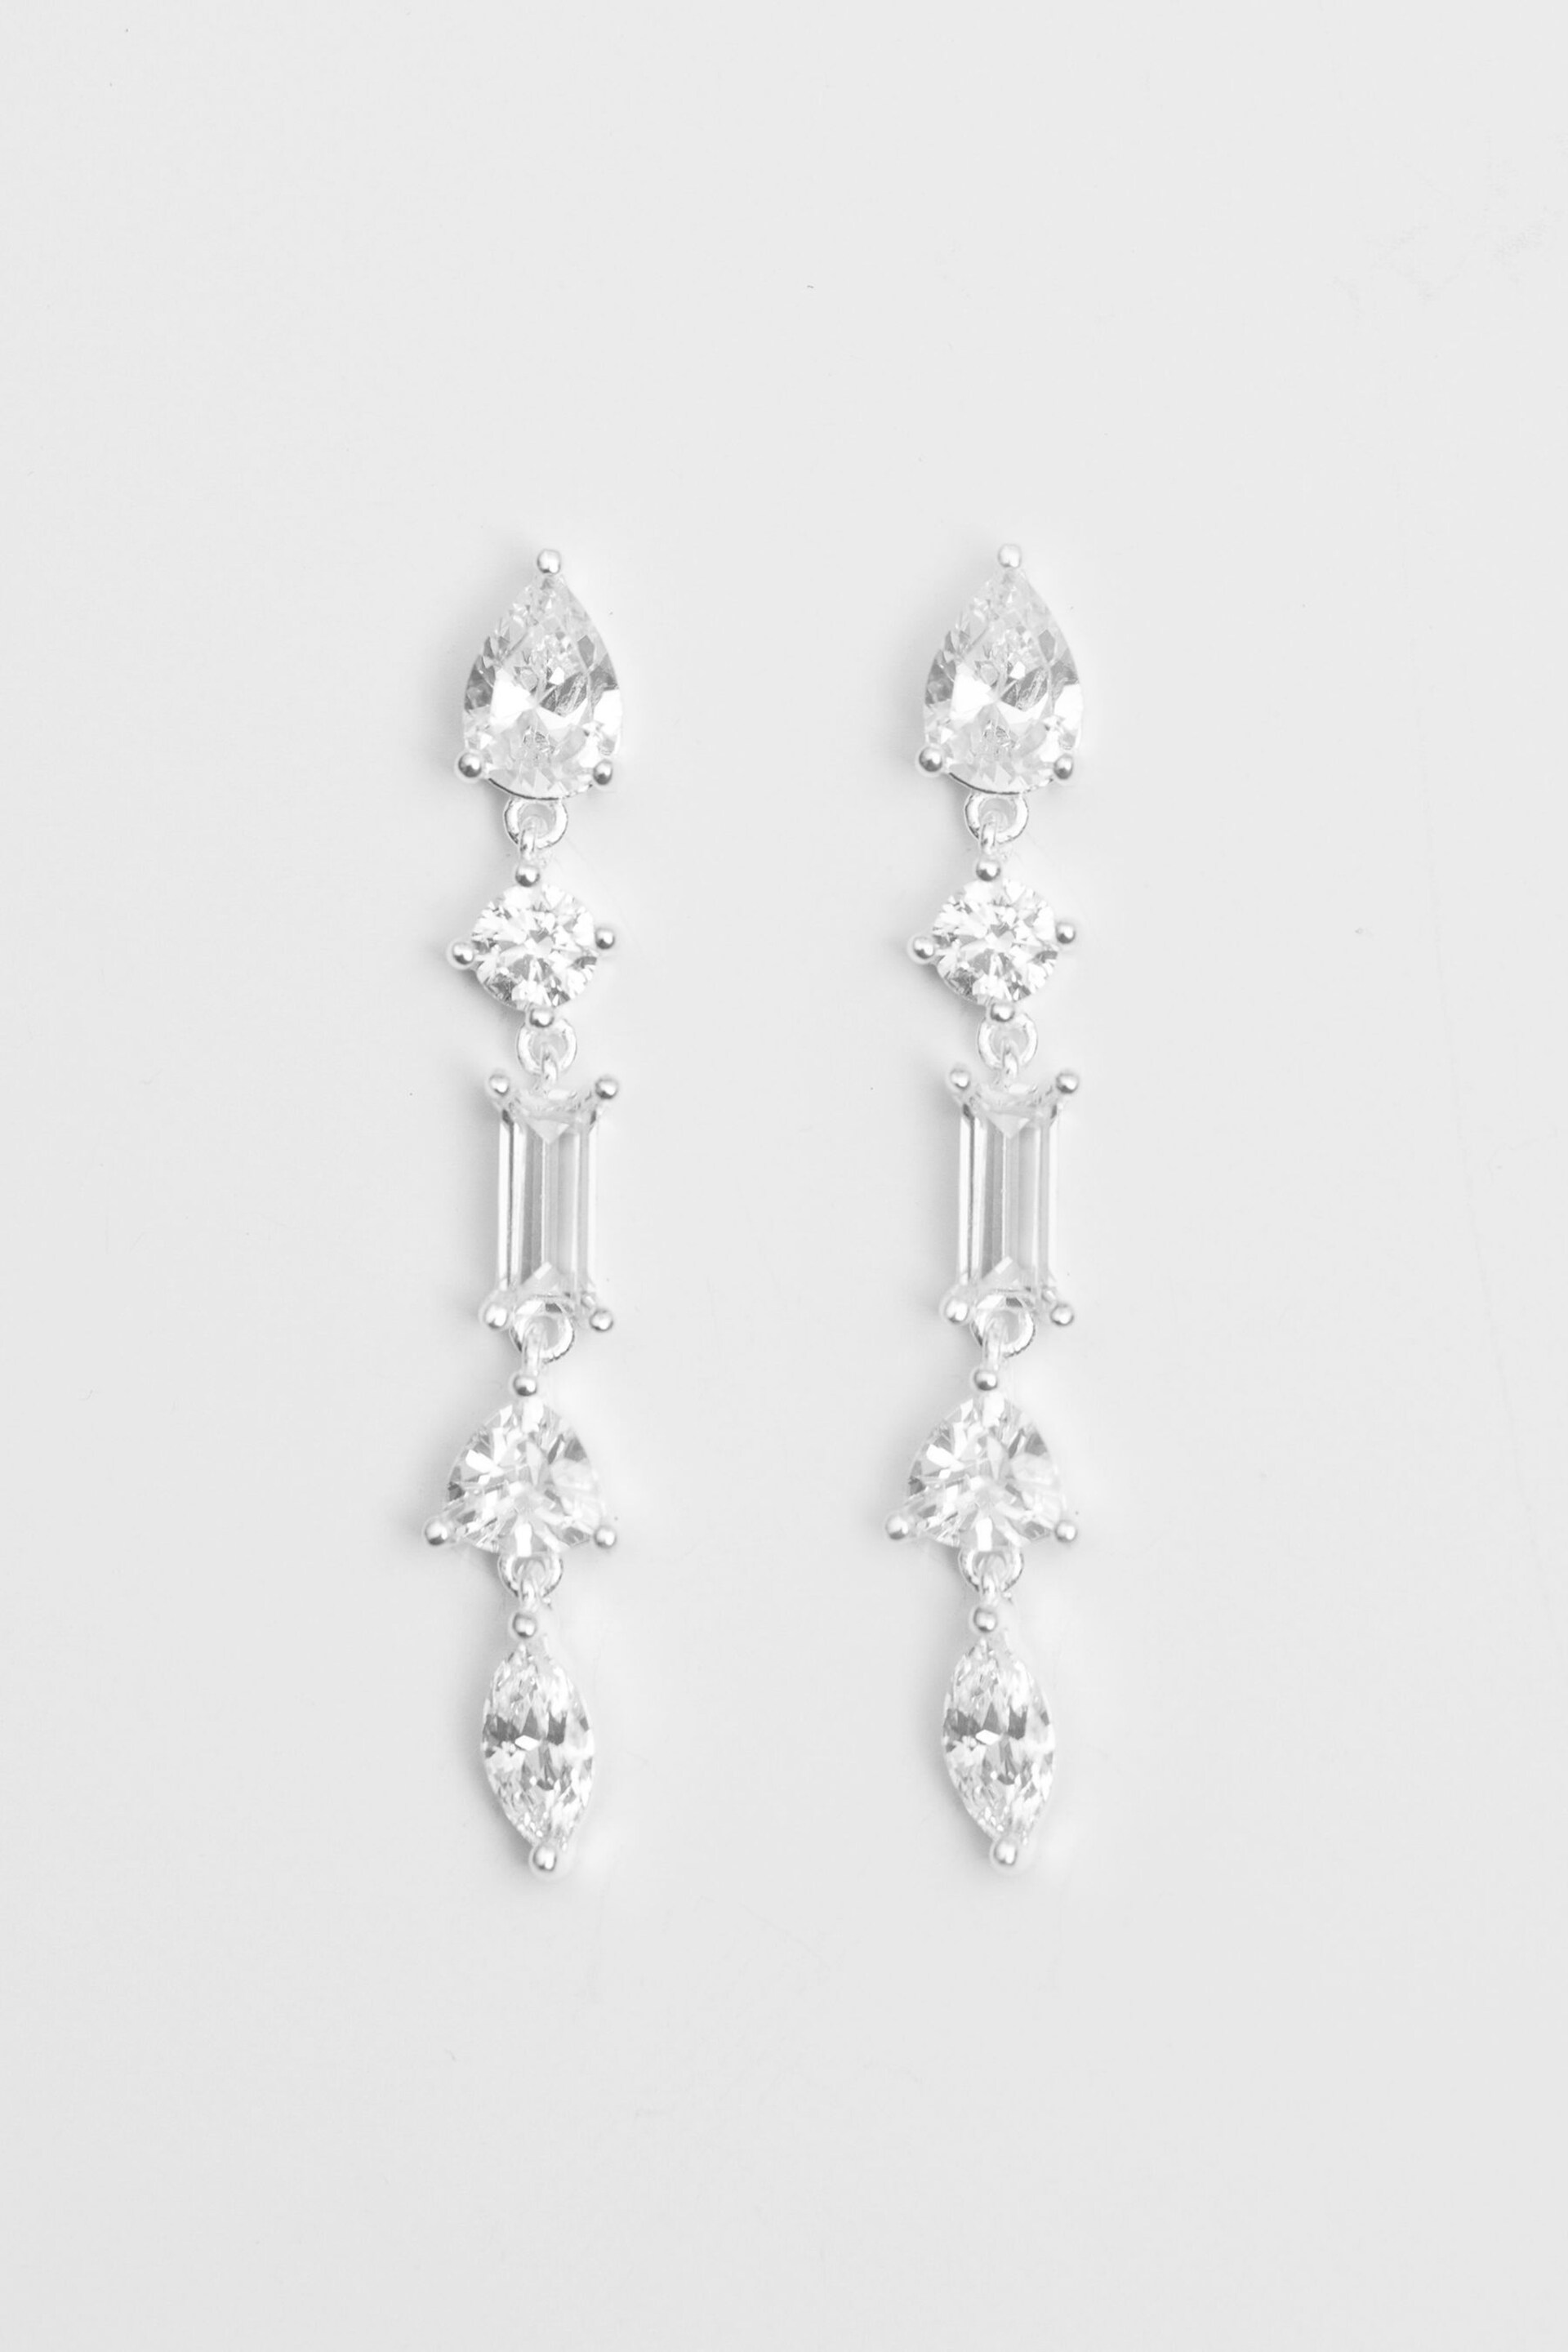 Simply Silver Silver Cubic Zirconia Mixed Stone Drop Earrings - Image 2 of 2